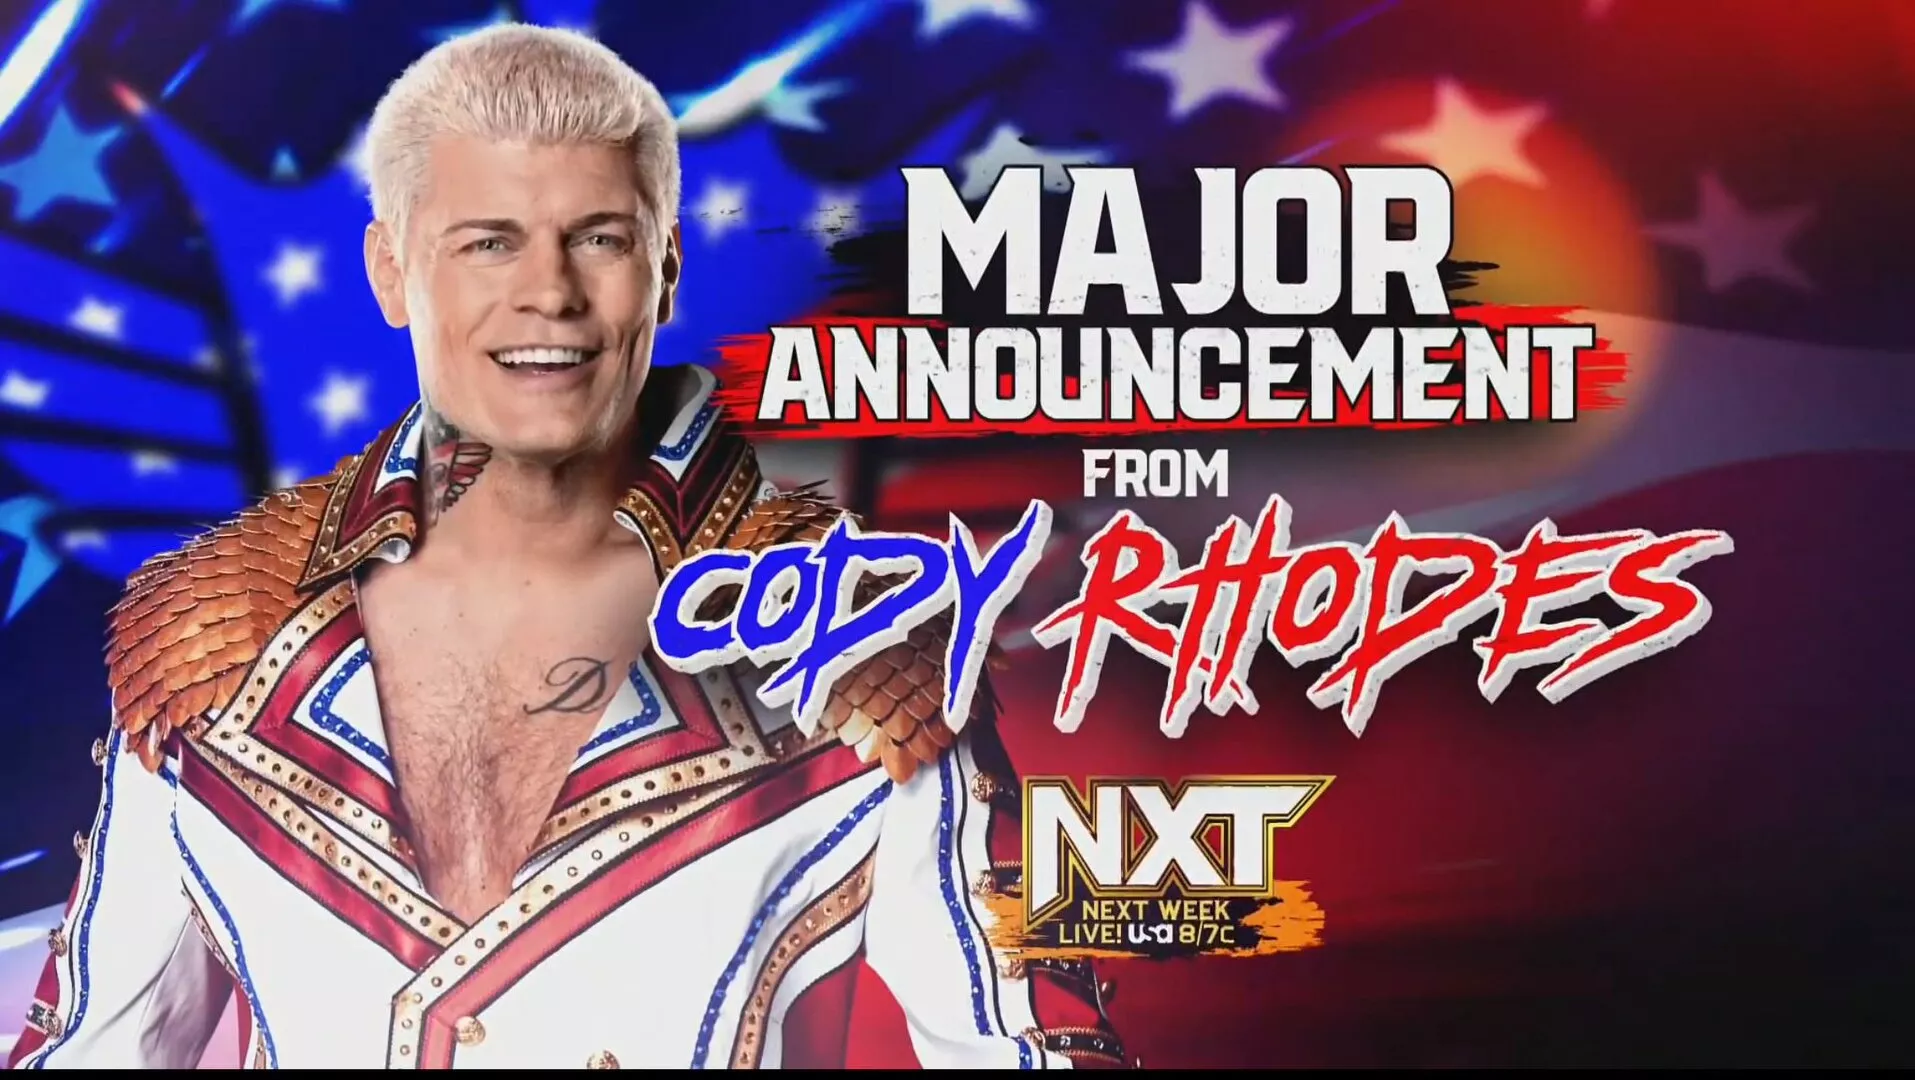 John Cena, Cody Rhodes to appear on WWE NXT to counter Edge’s AEW debut match